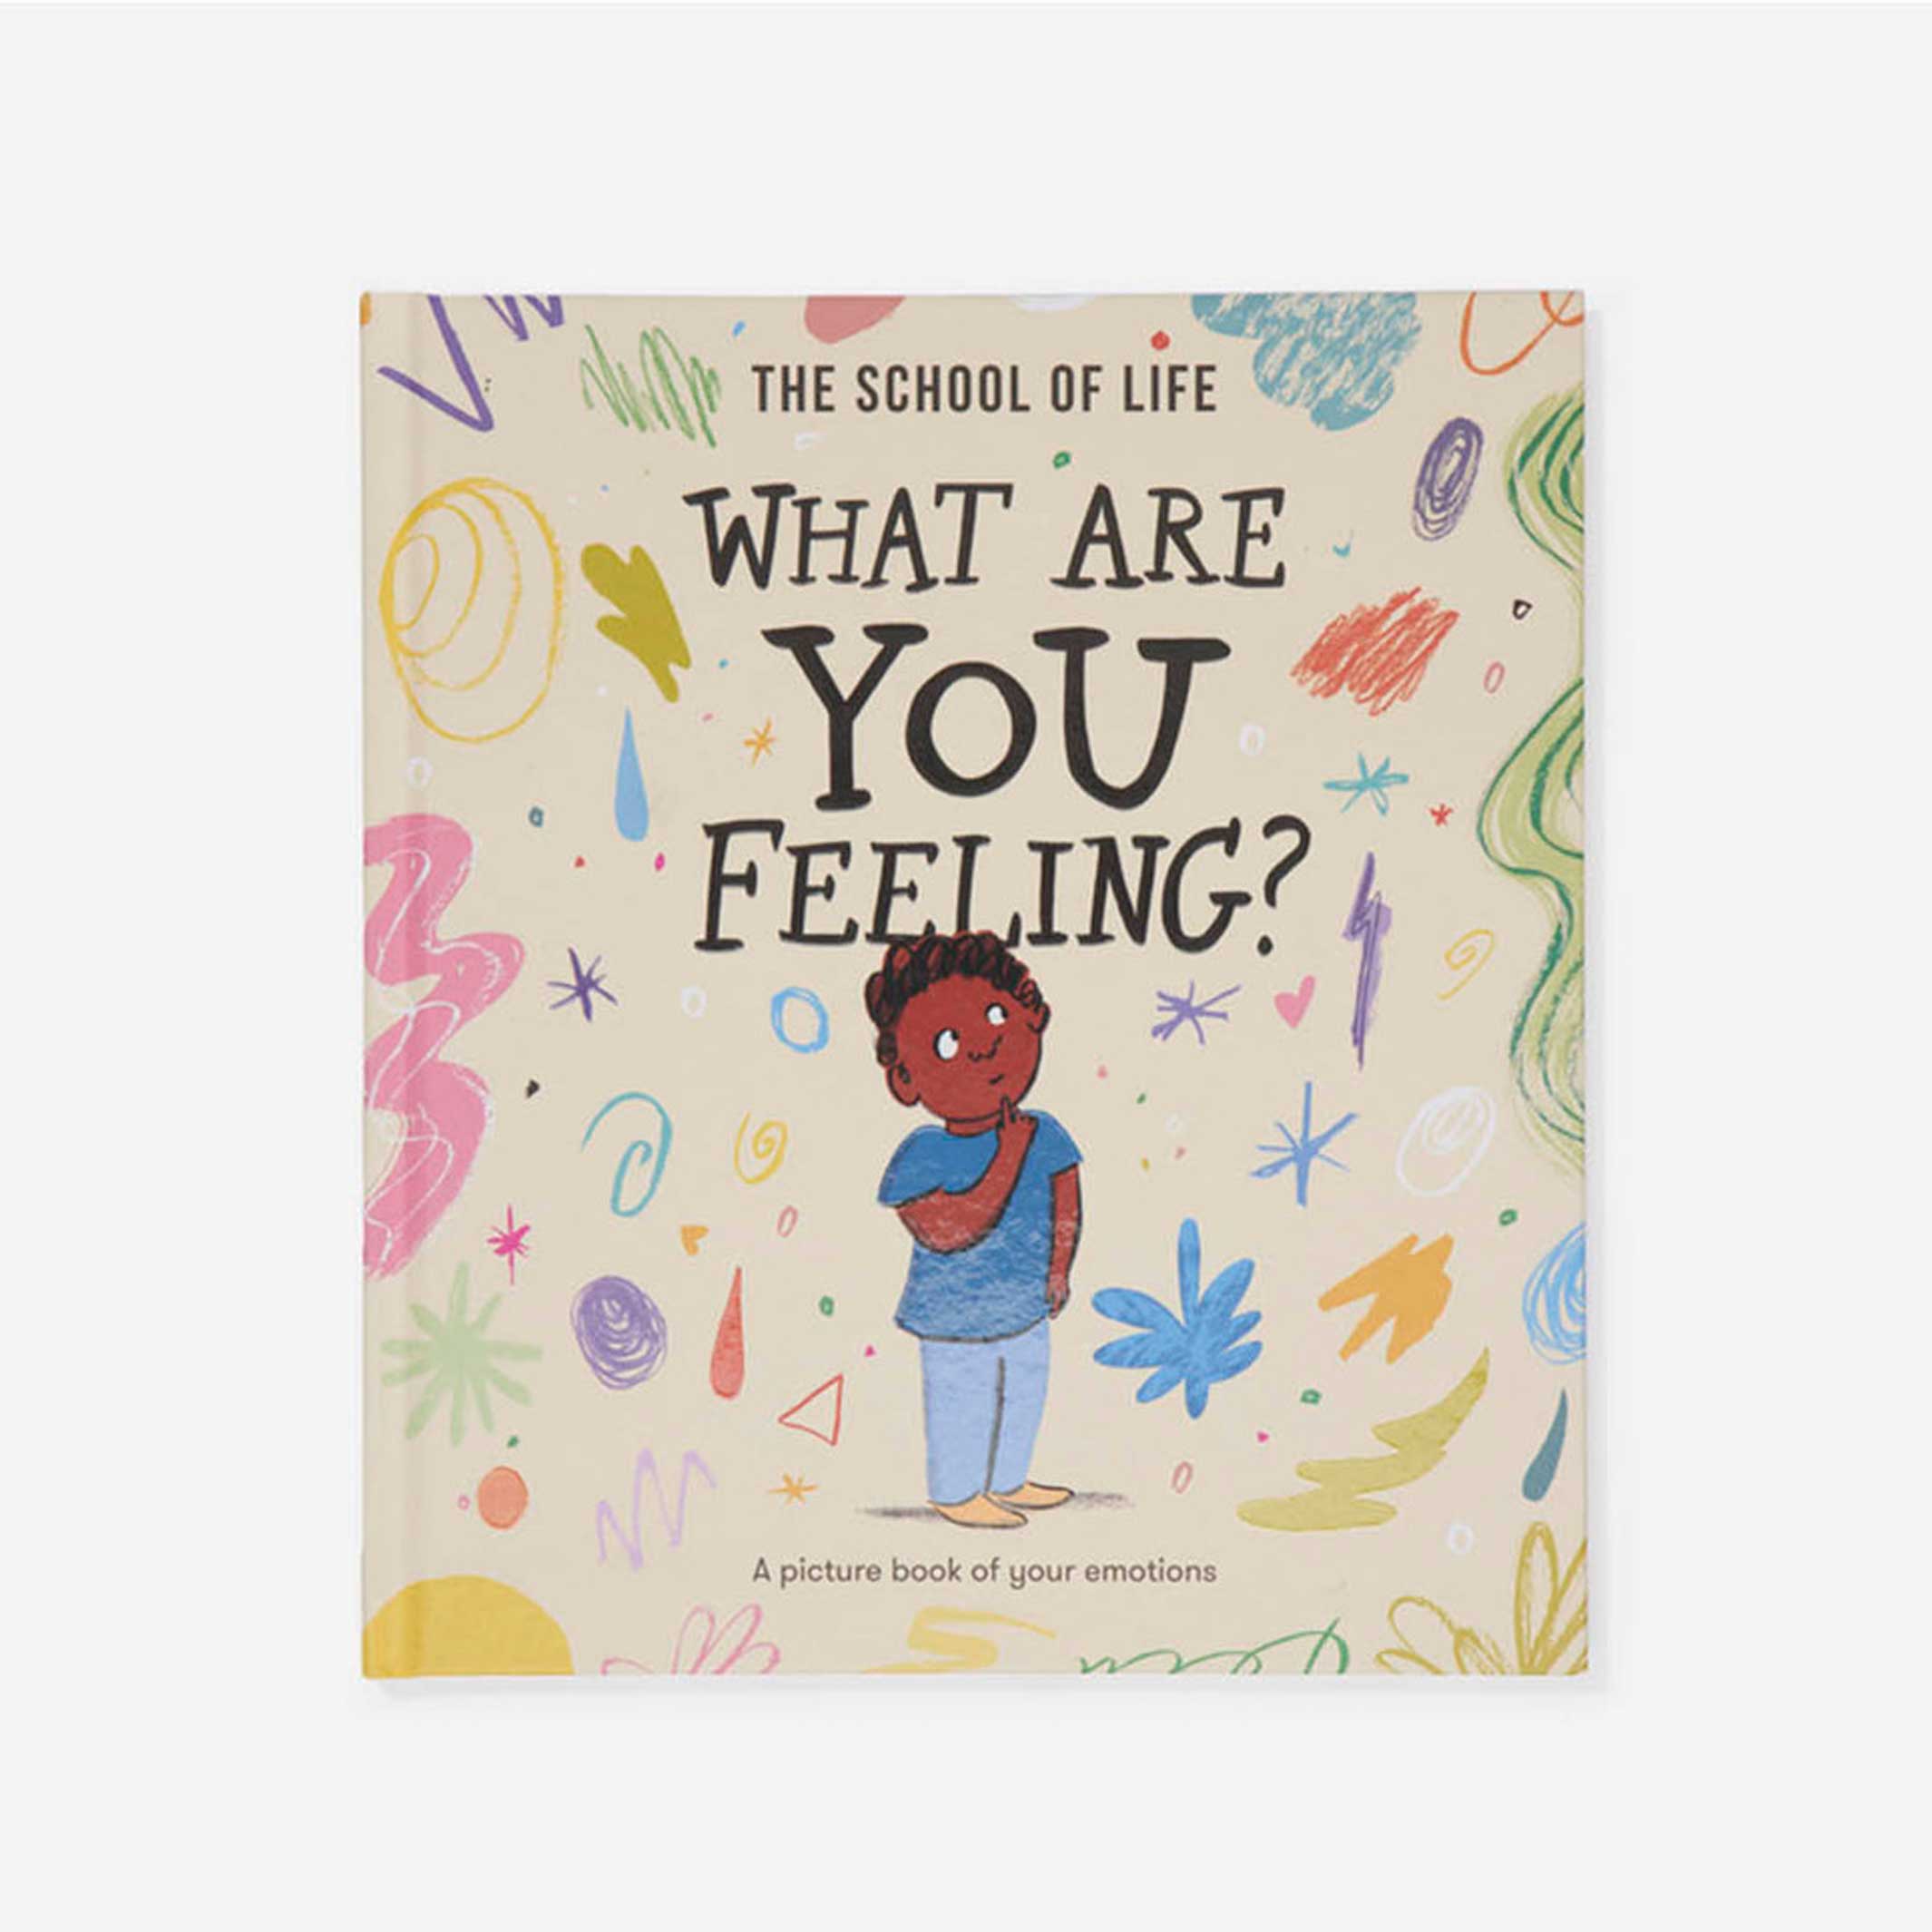 WHAT are you FEELING? | KINDERBUCH über GEFÜHLE | English Edition | The School of Life